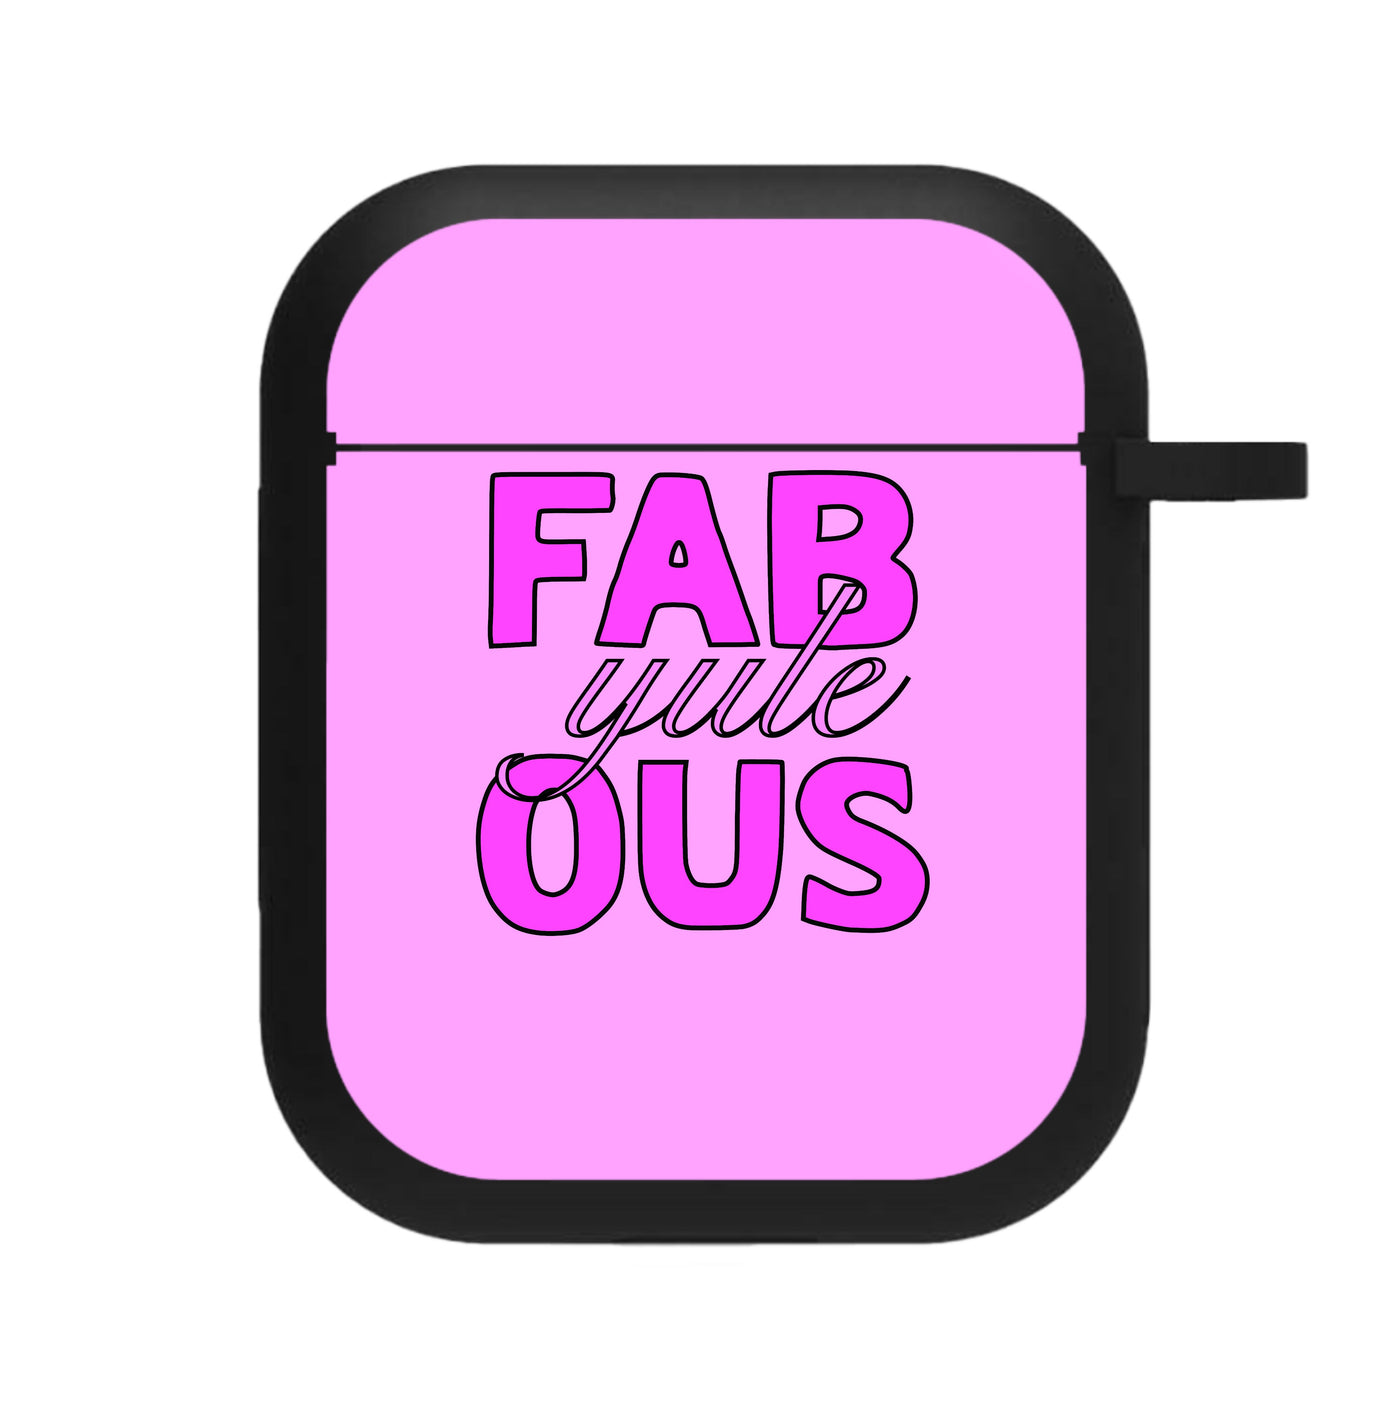 Fab-Yule-Ous Pink - Christmas Puns AirPods Case